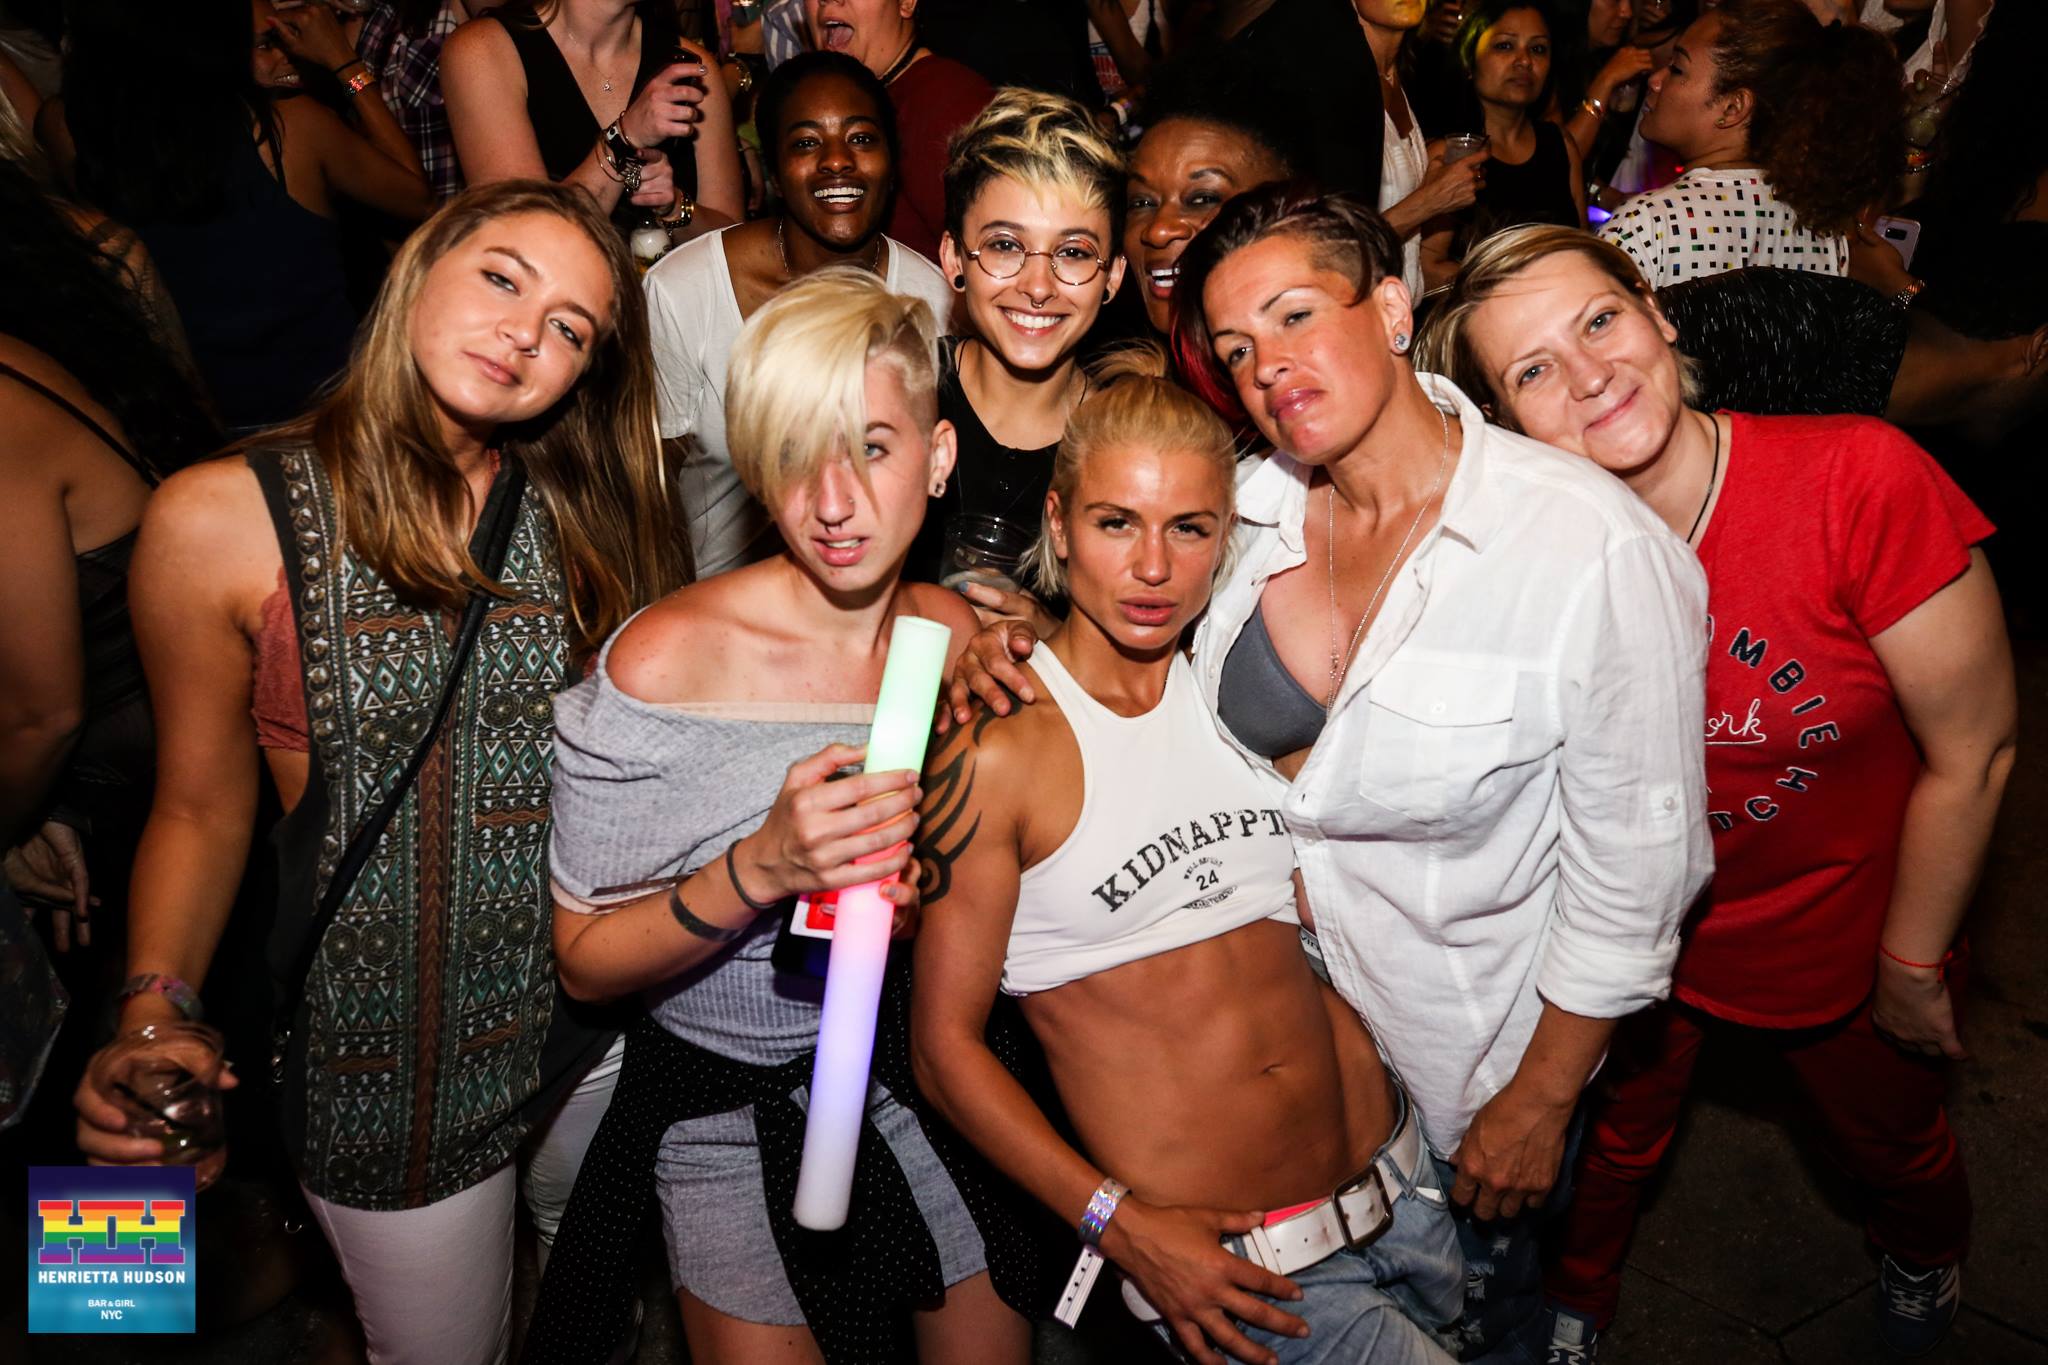 10 Of The Best Lesbian Bars In New York City Discover Walks Blog 4556